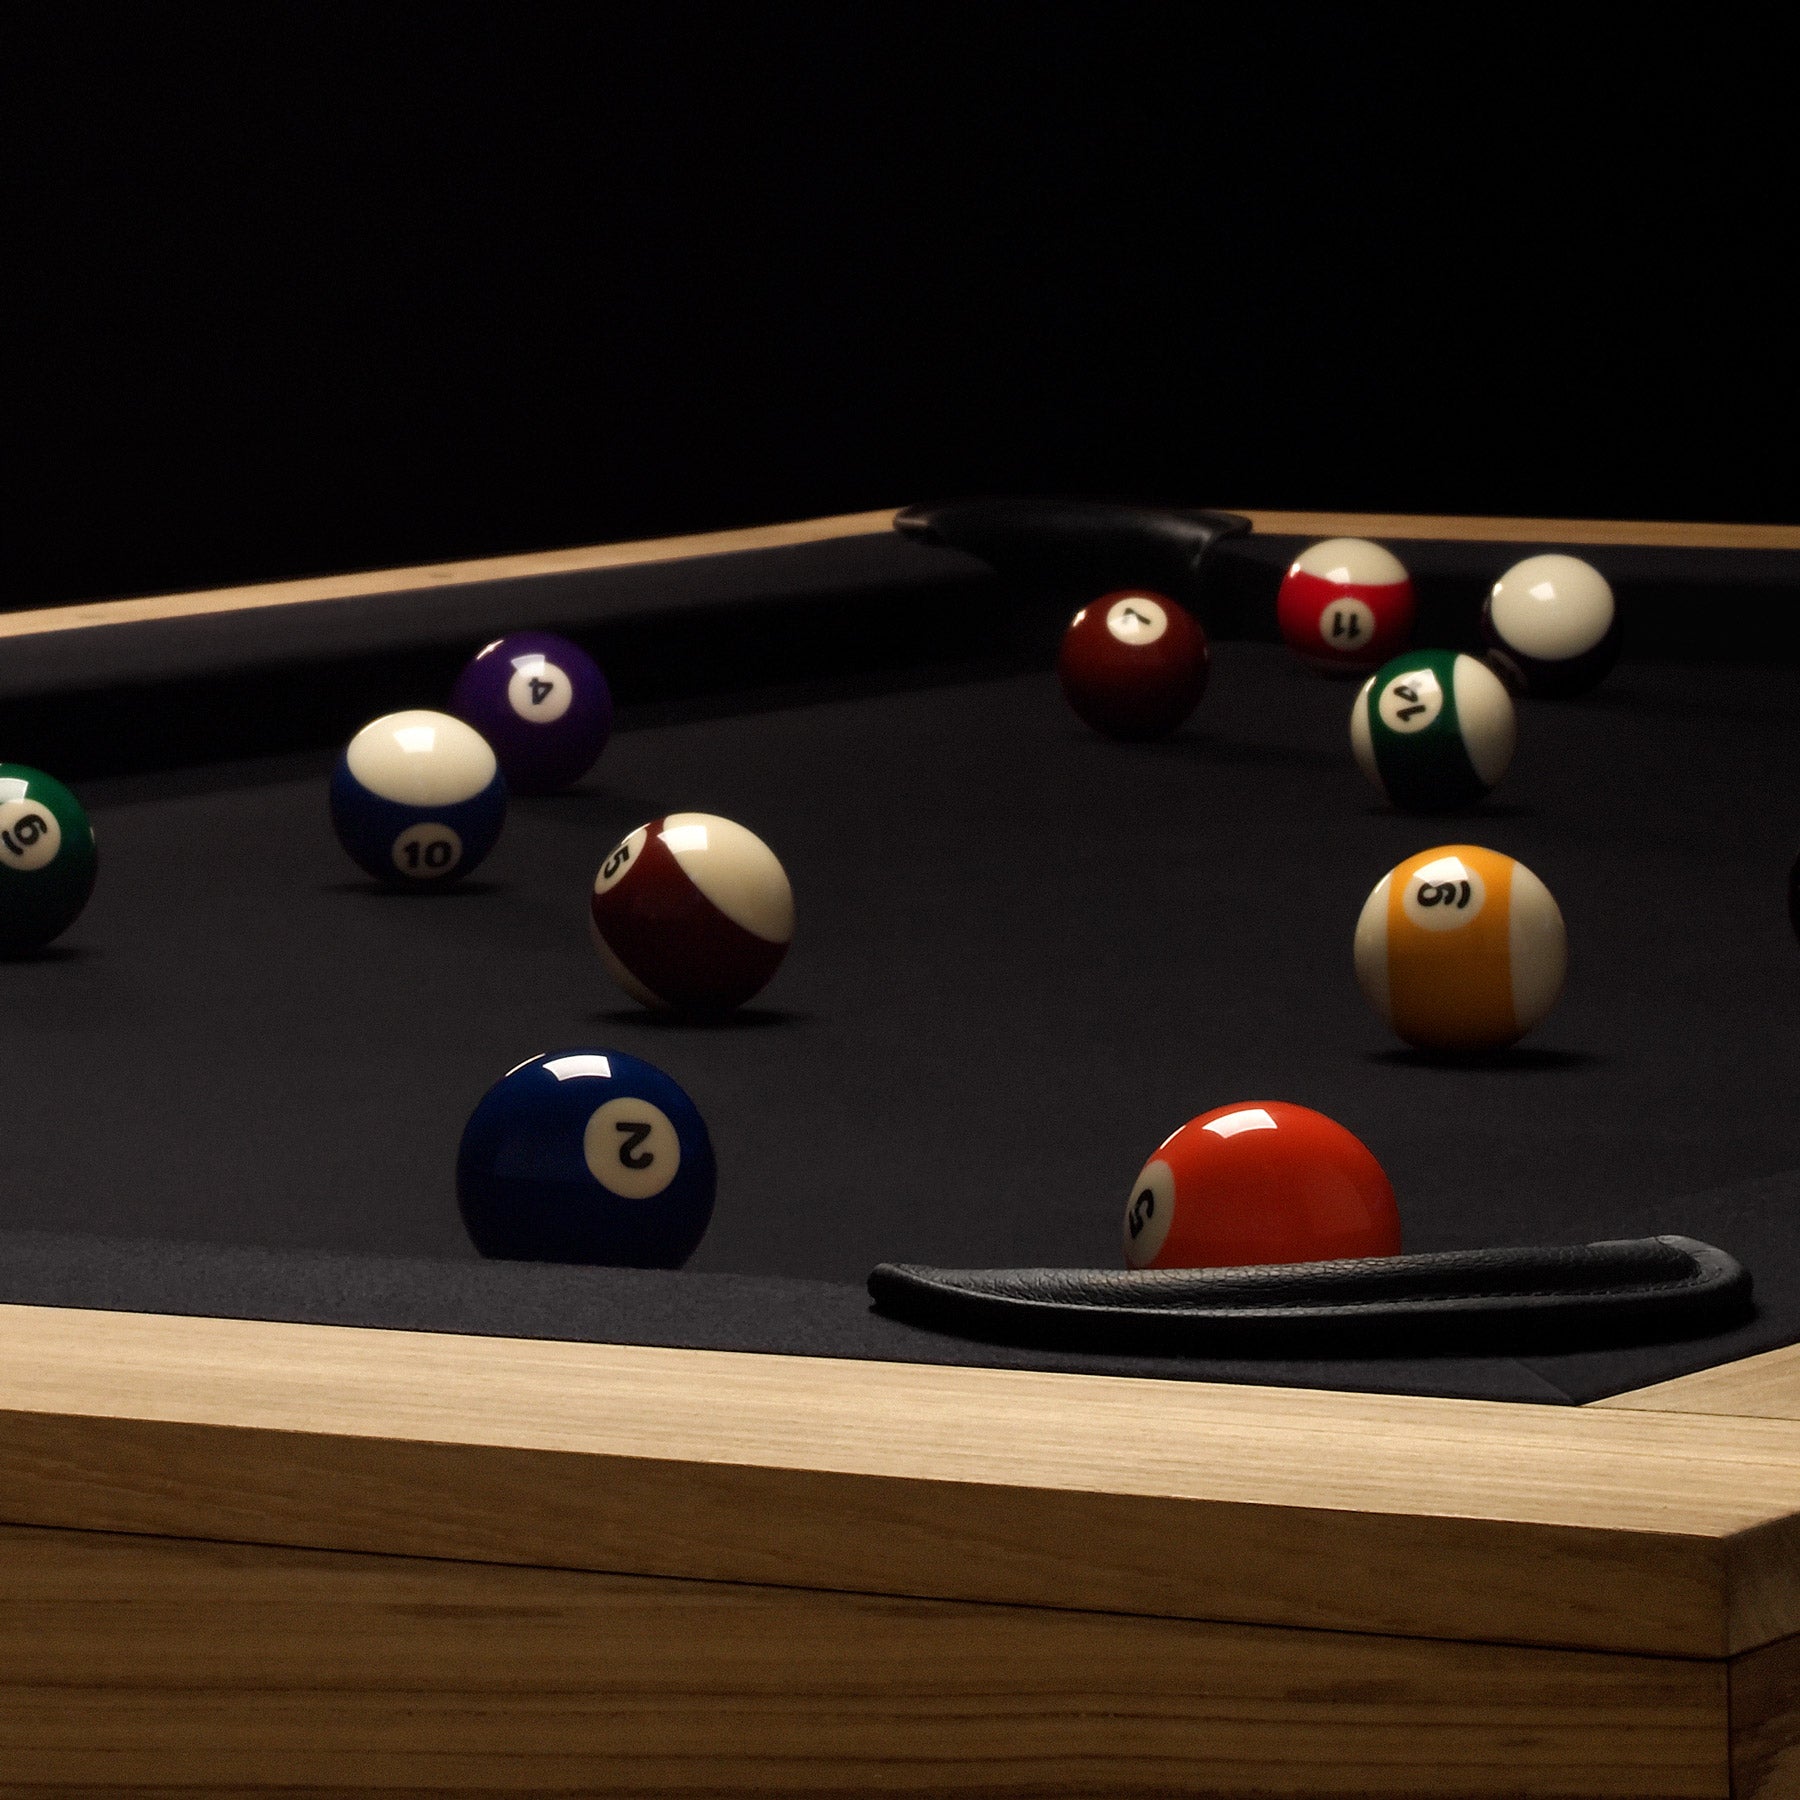 Tomaz Shoes (MY): Alex Dining Pool Table everyone is talking about